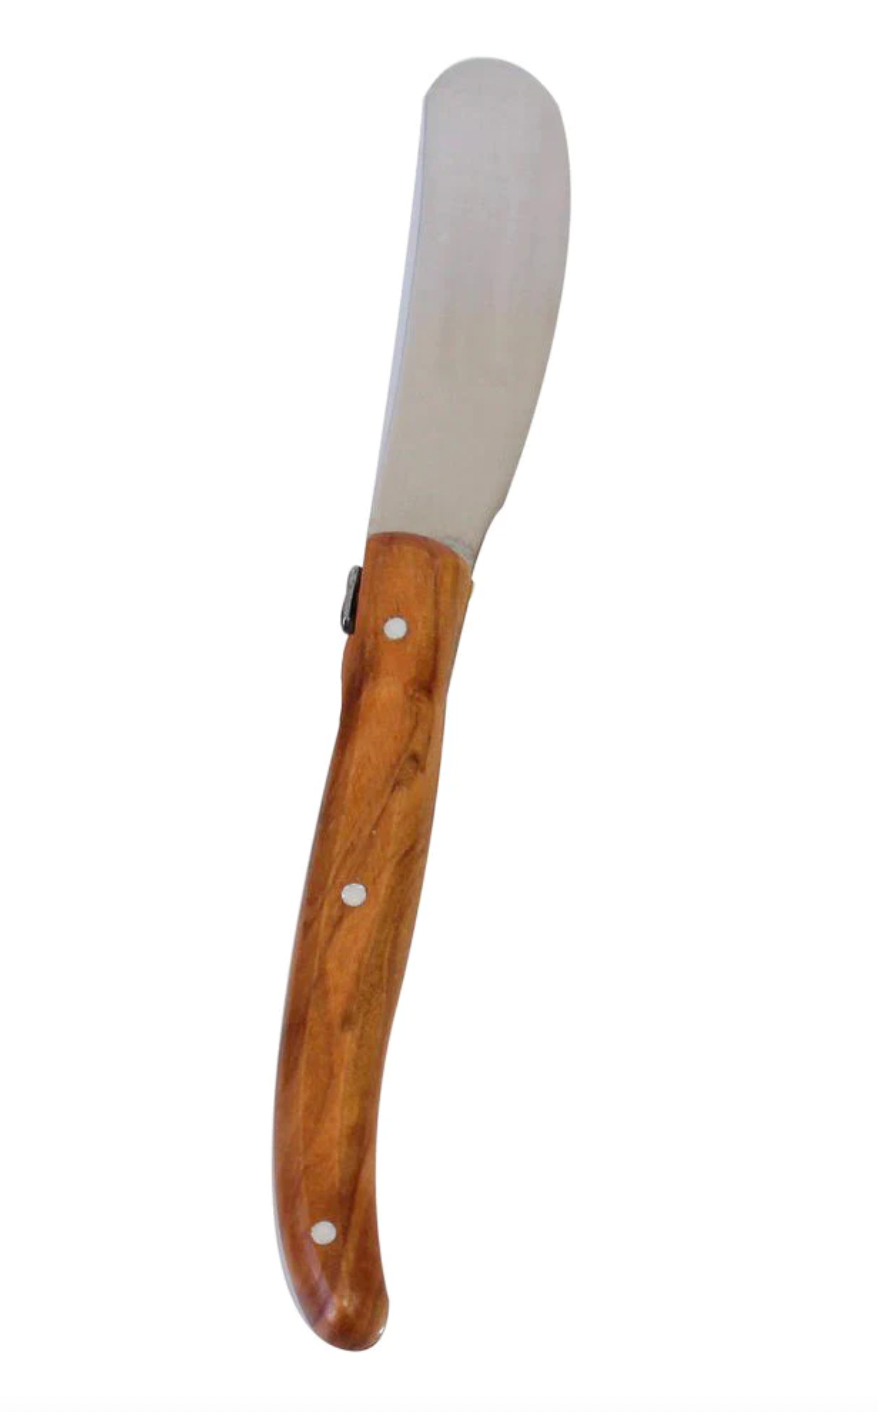 Laguiole Olive Wood Cheese Knife - The Grey Pearl